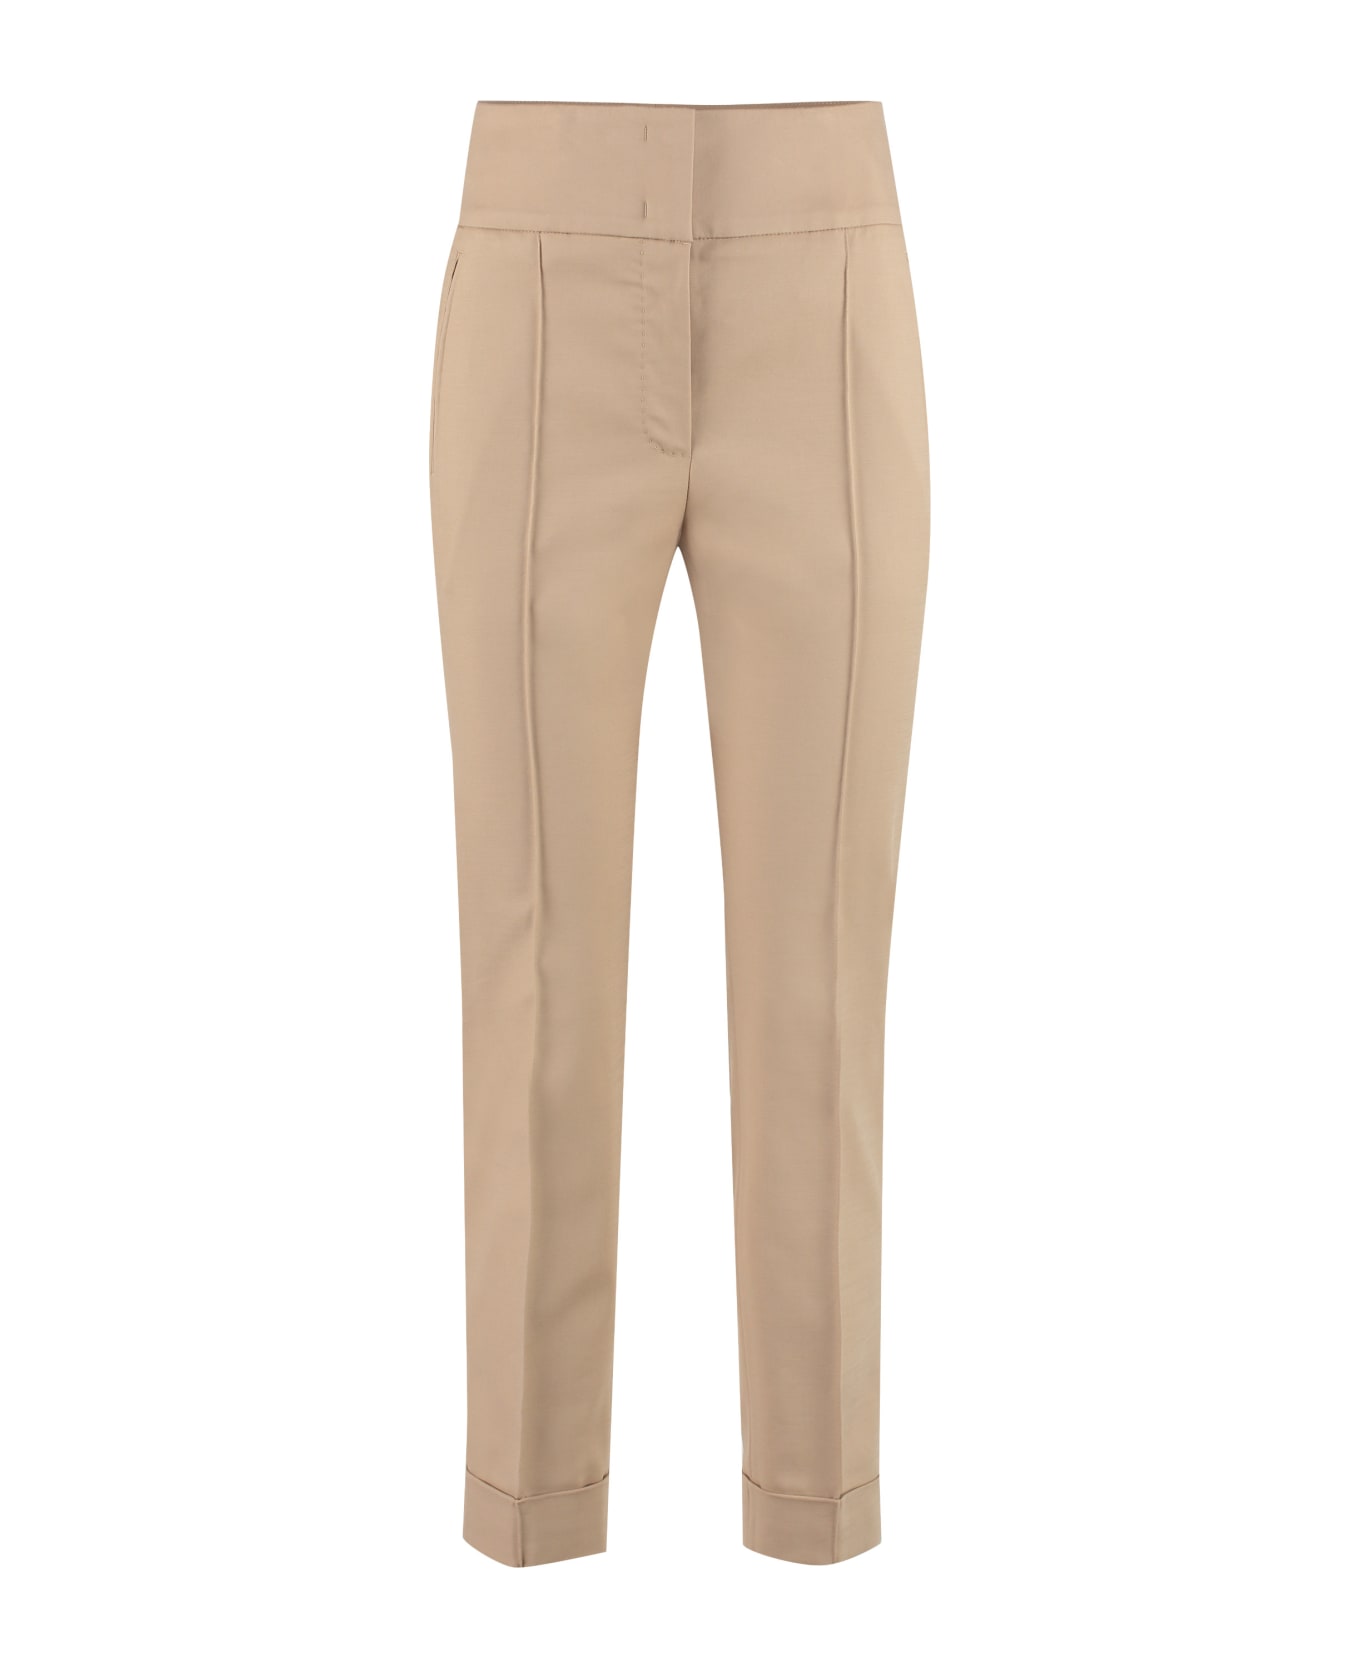 Peserico High-rise Cotton Trousers - Beige ボトムス